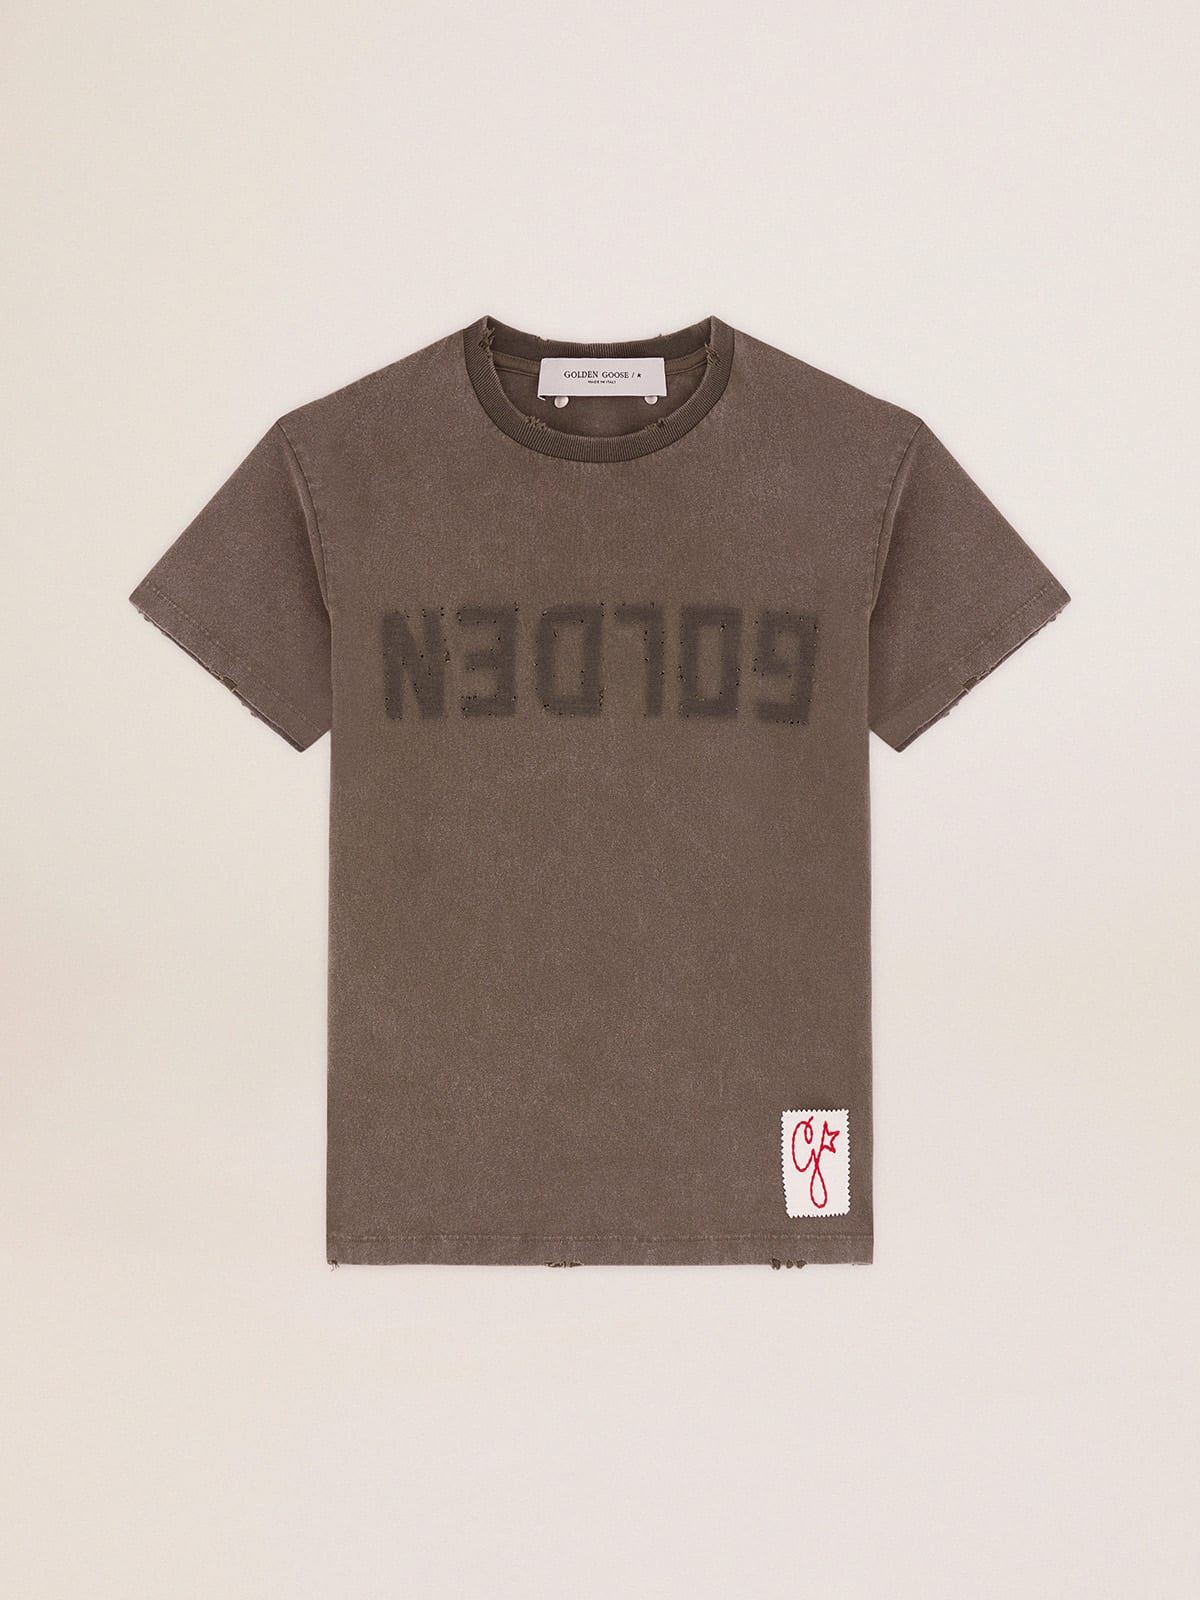 Olive-green regular-fit T-shirt with Golden lettering on the front